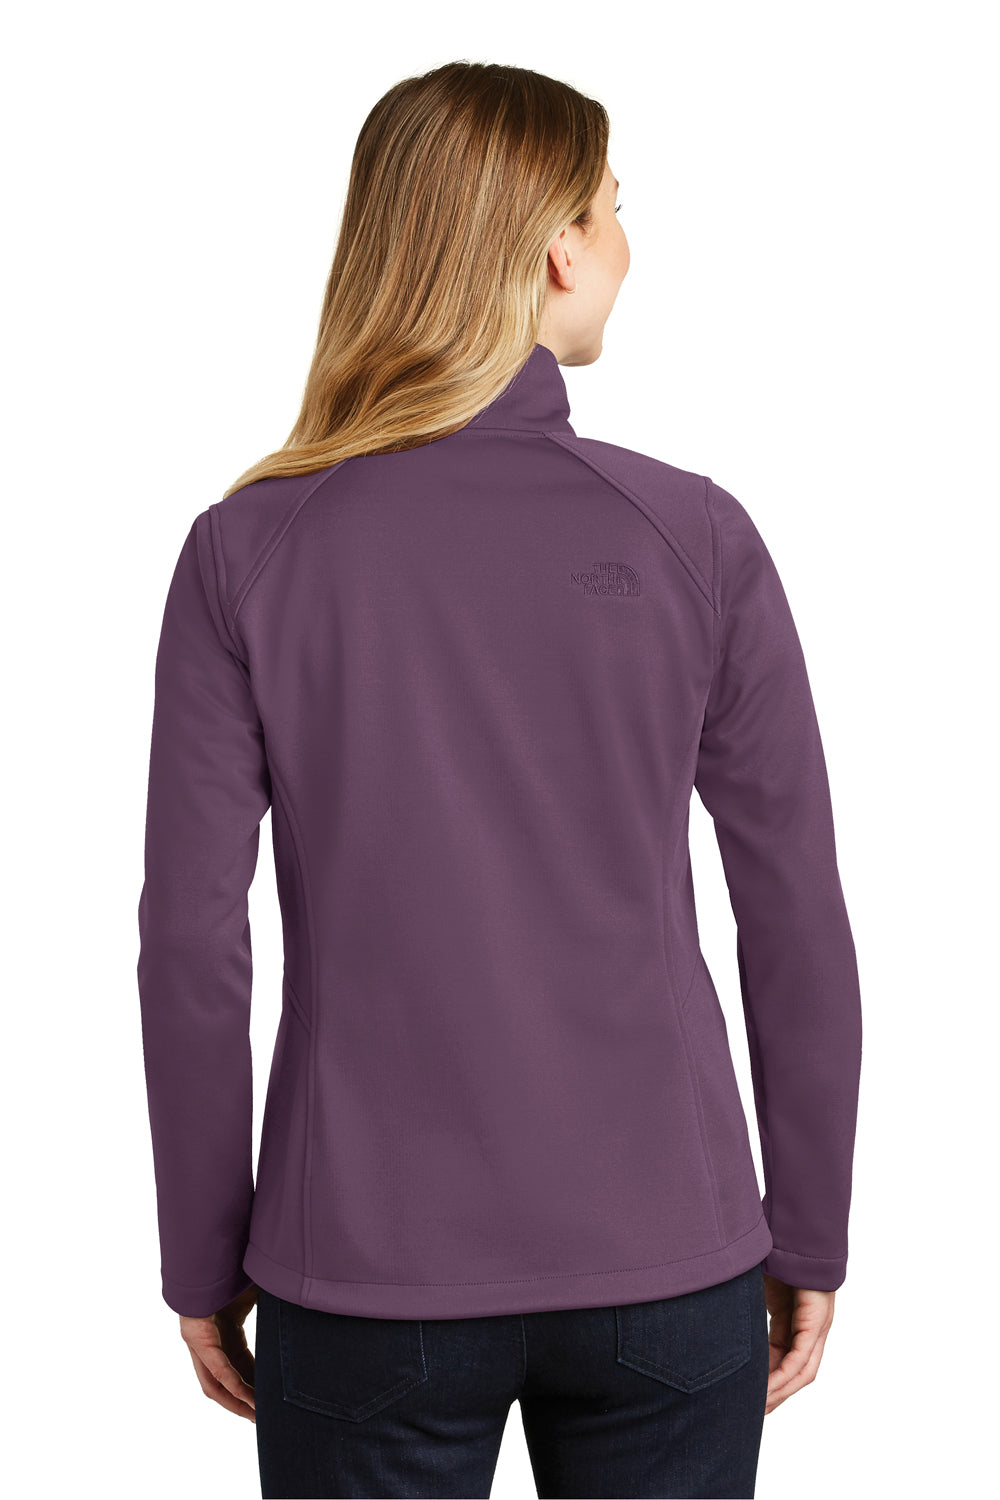 The North Face NF0A3LGY Womens Ridgeline Wind & Water Resistant Full Zip Jacket Blackberry Purple Back